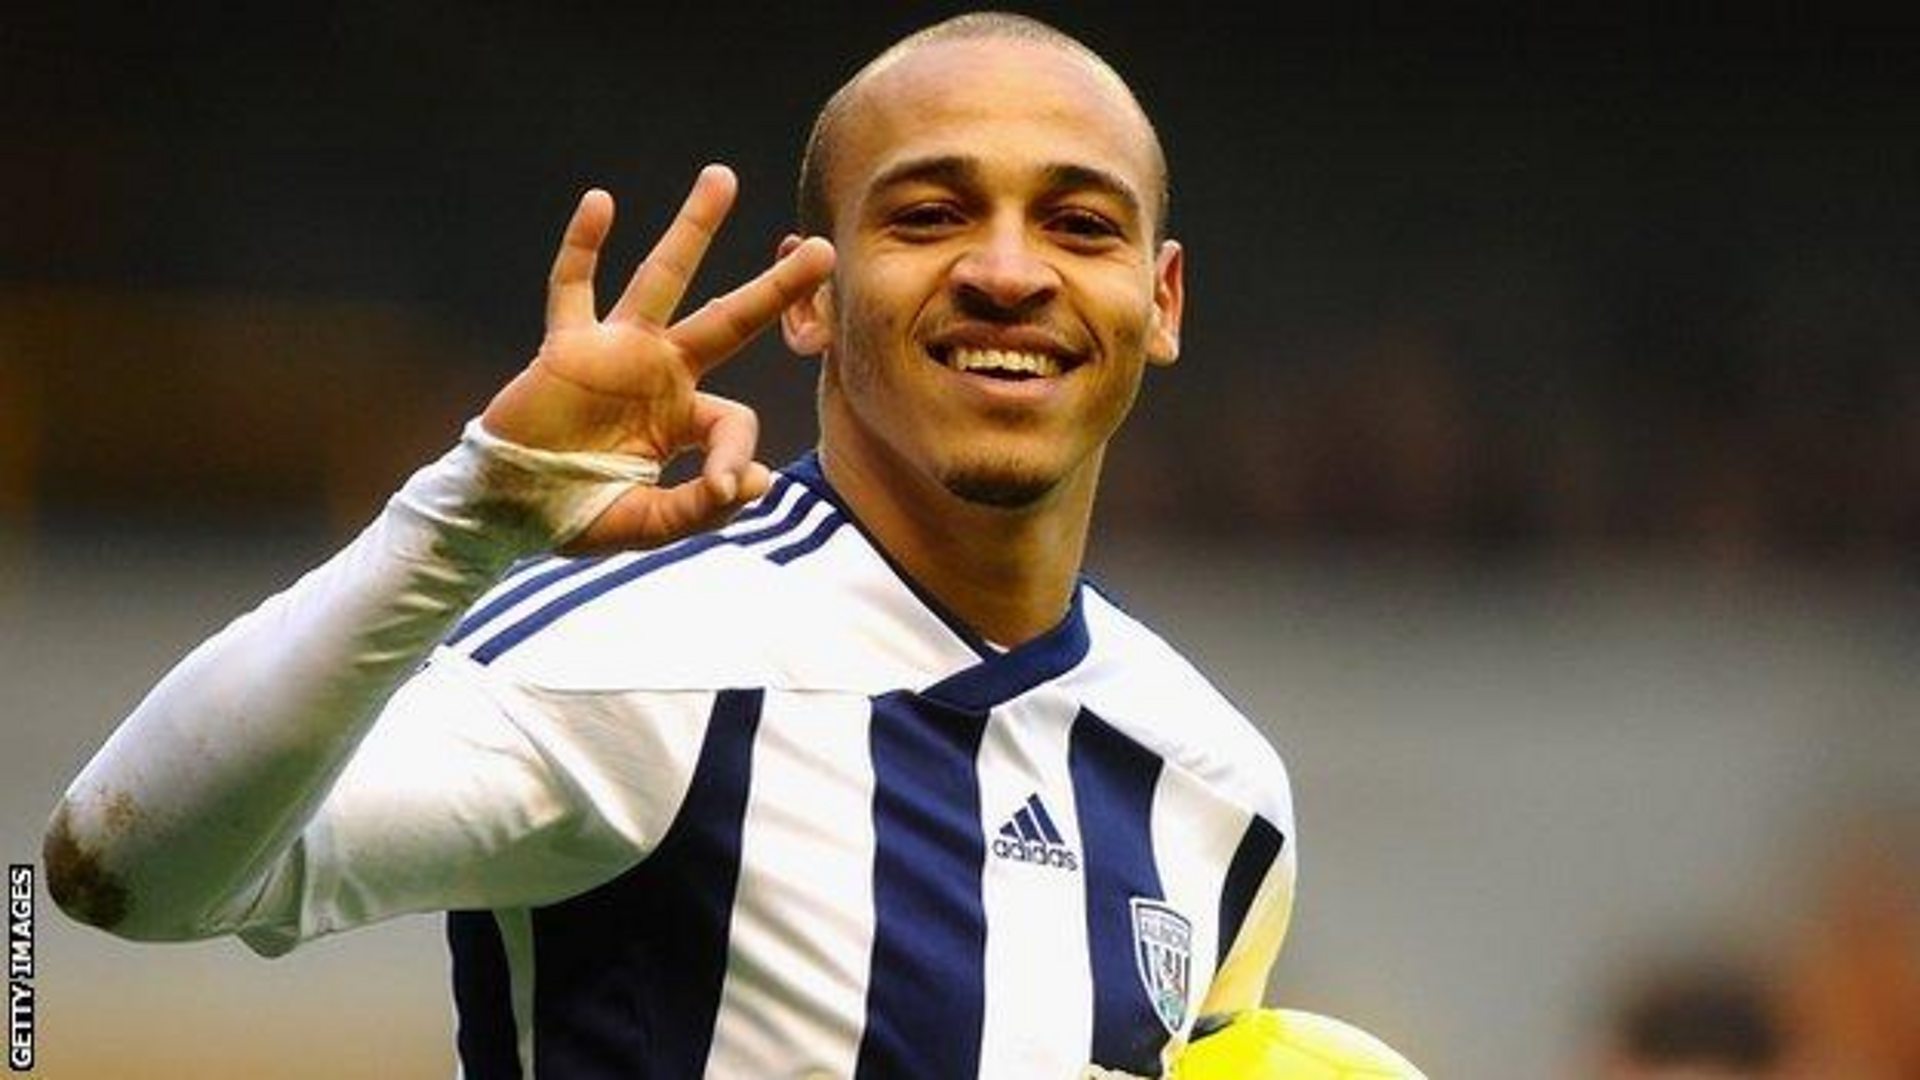 Wolves 1-5 West Brom - BBC Sport